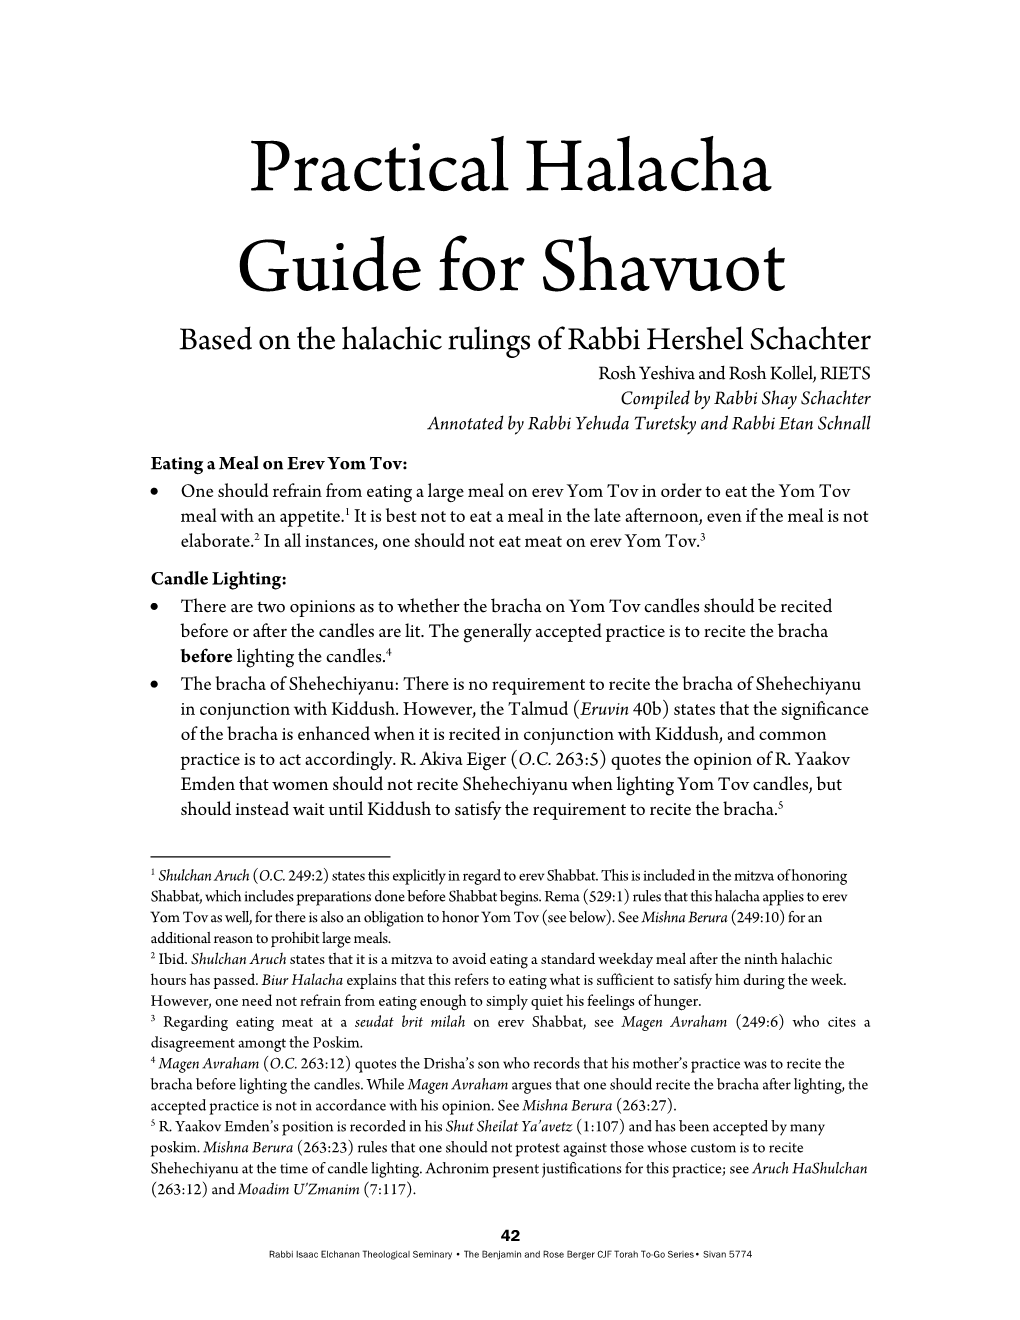 Practical Halacha Guide for Shavuot